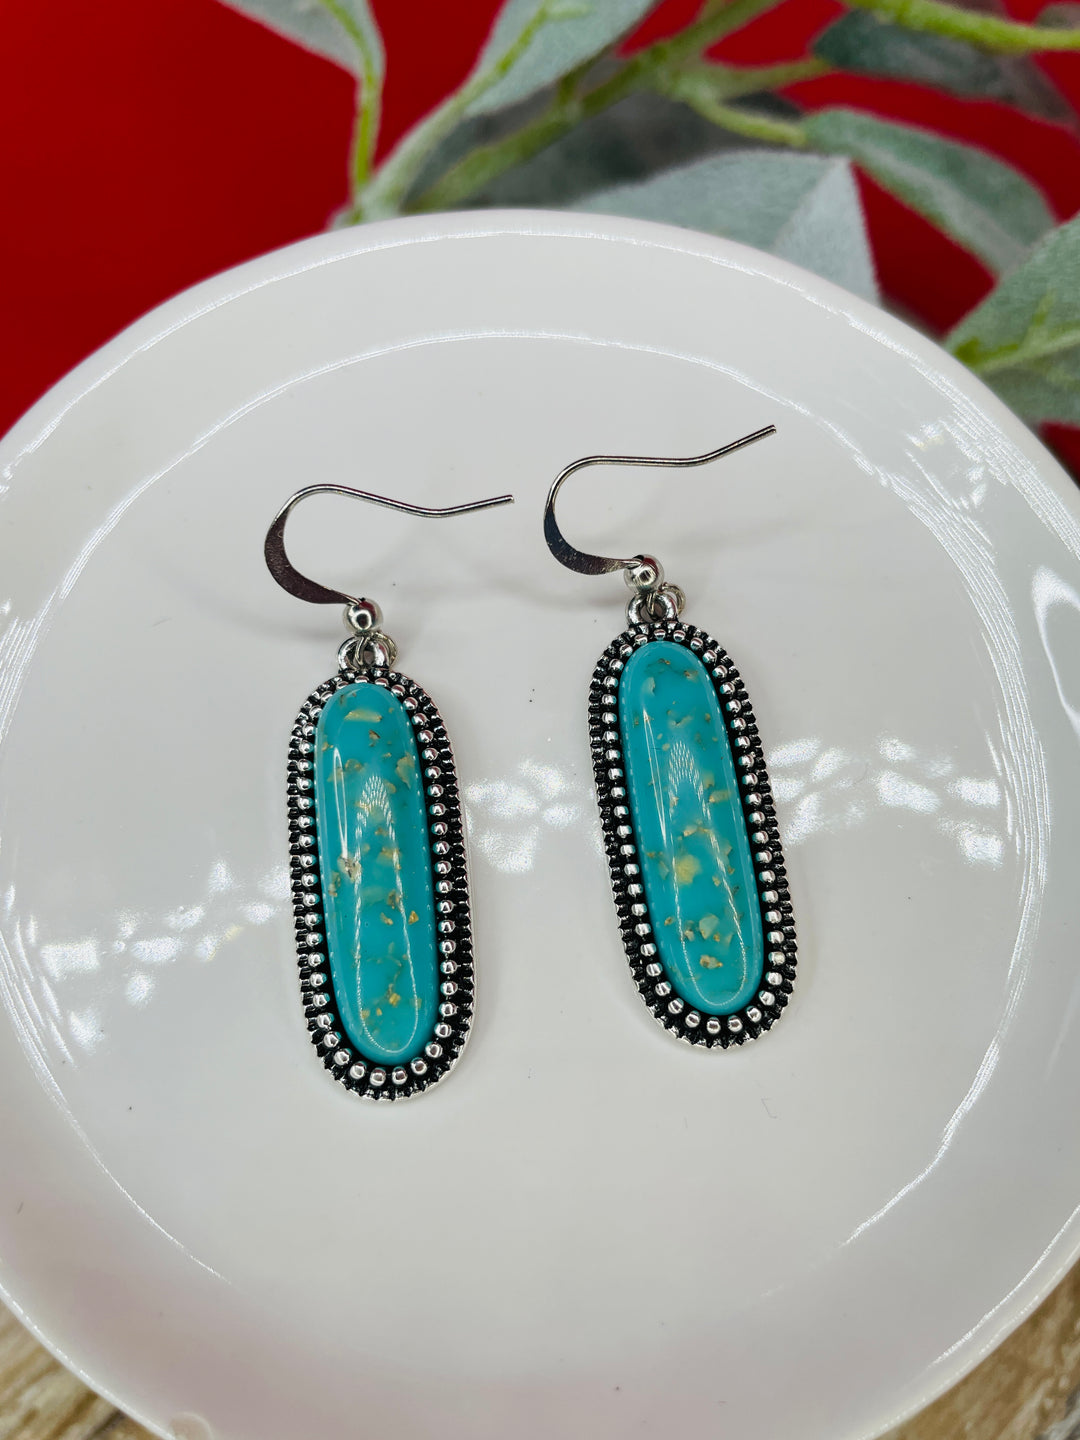 Speckled Turquoise Earrings